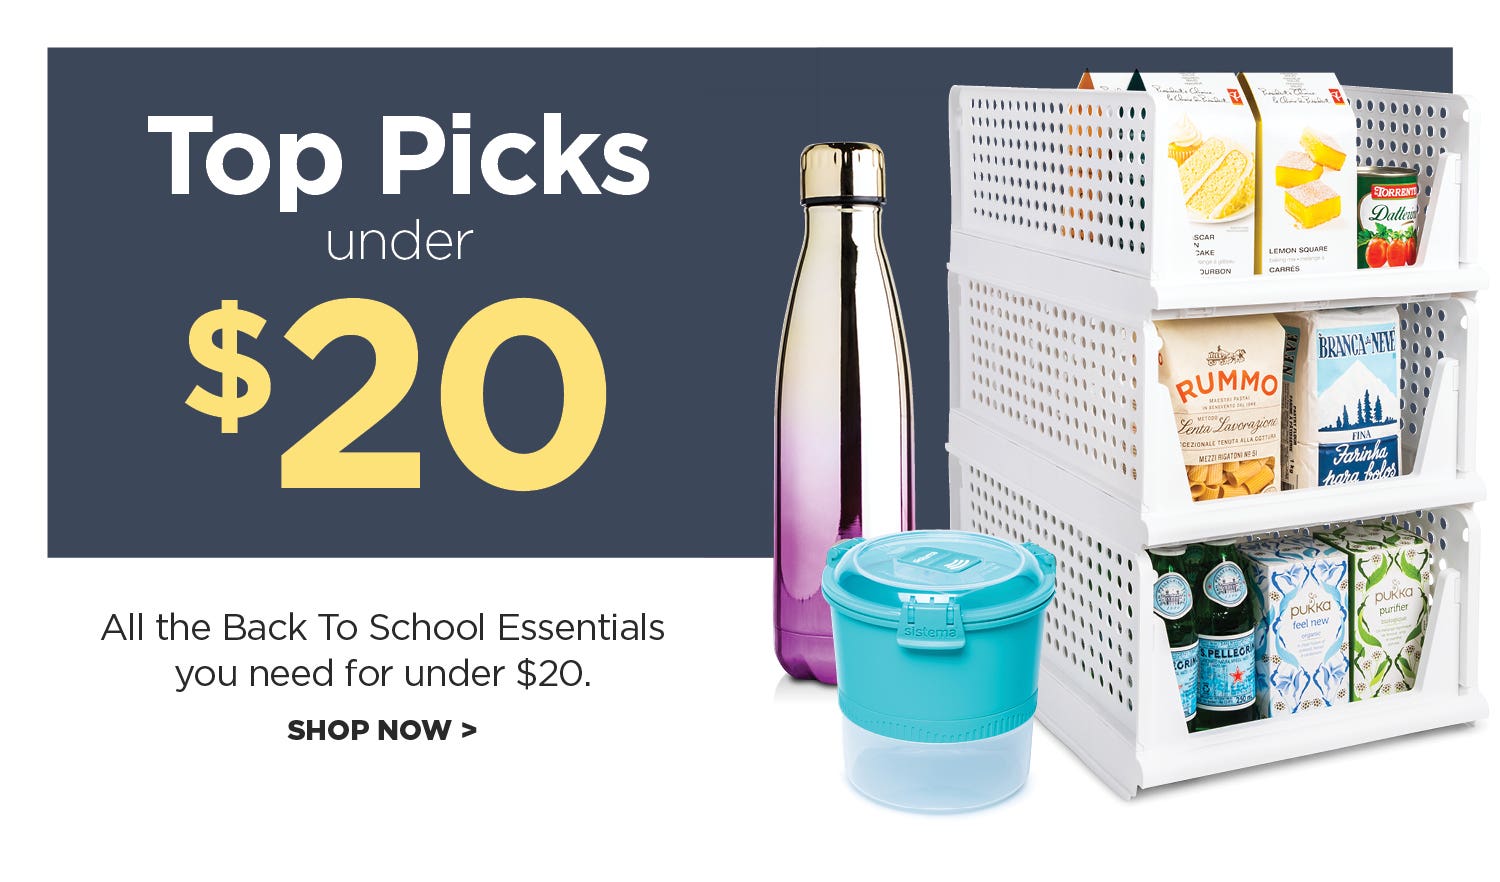 Top Picks Under $20 – all the Back To School essentials you need under $20